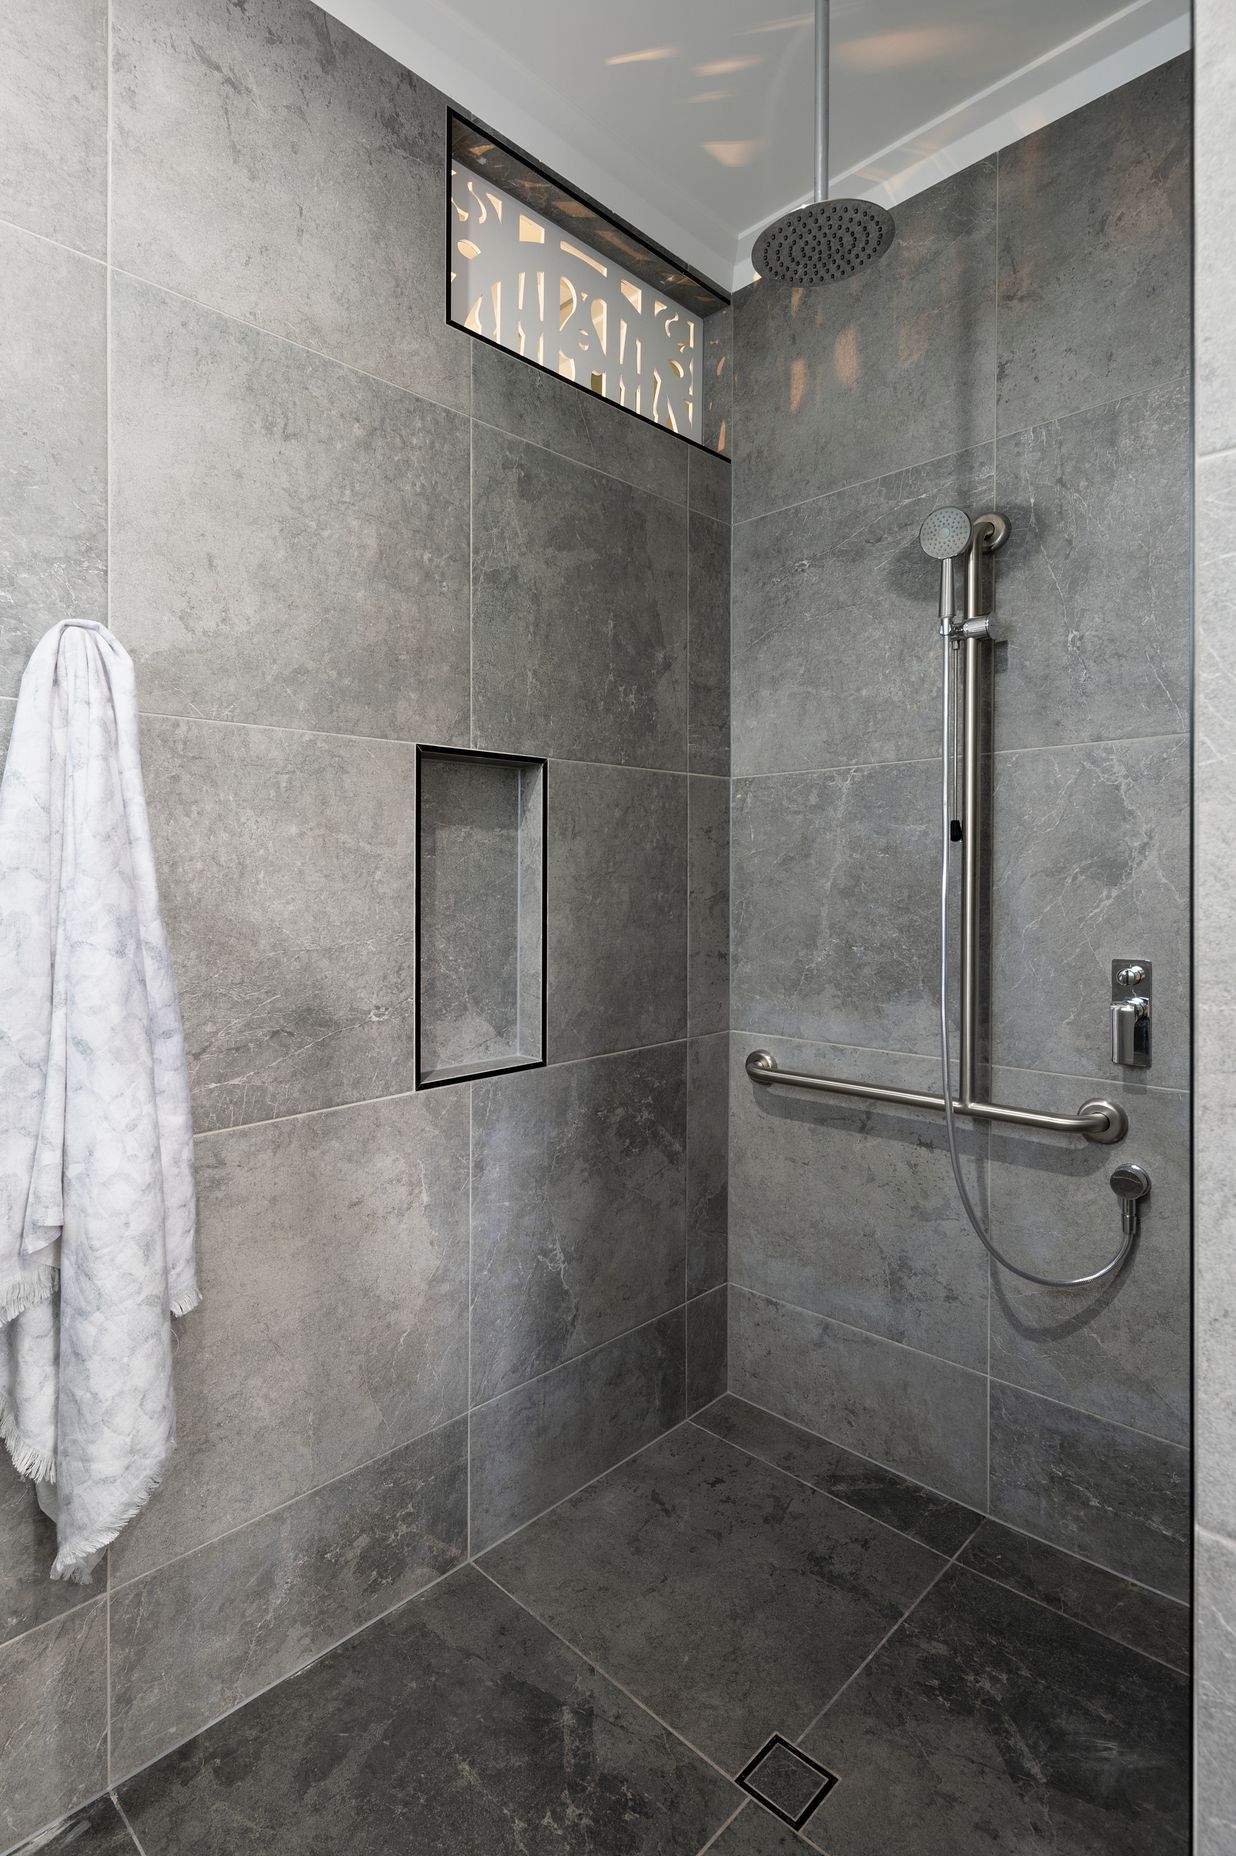 A grab bar and detatchable shower head make bathing more accessible | Auntie's Hut by 4305 Design | Photography by Angus Martin